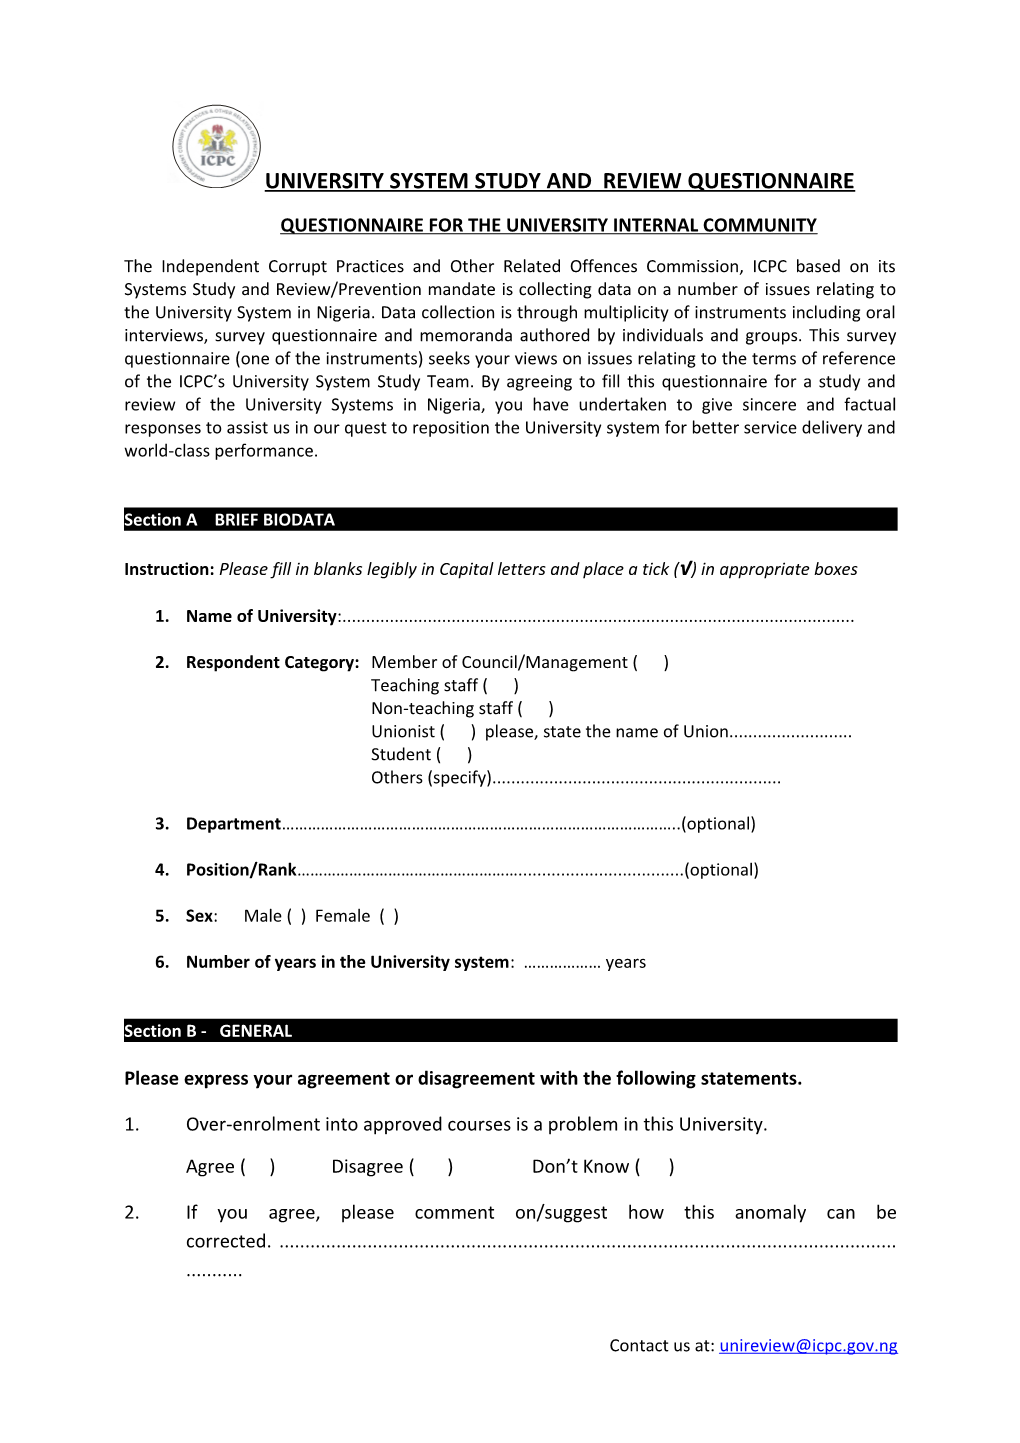 Questionnaire for the University Internal Community